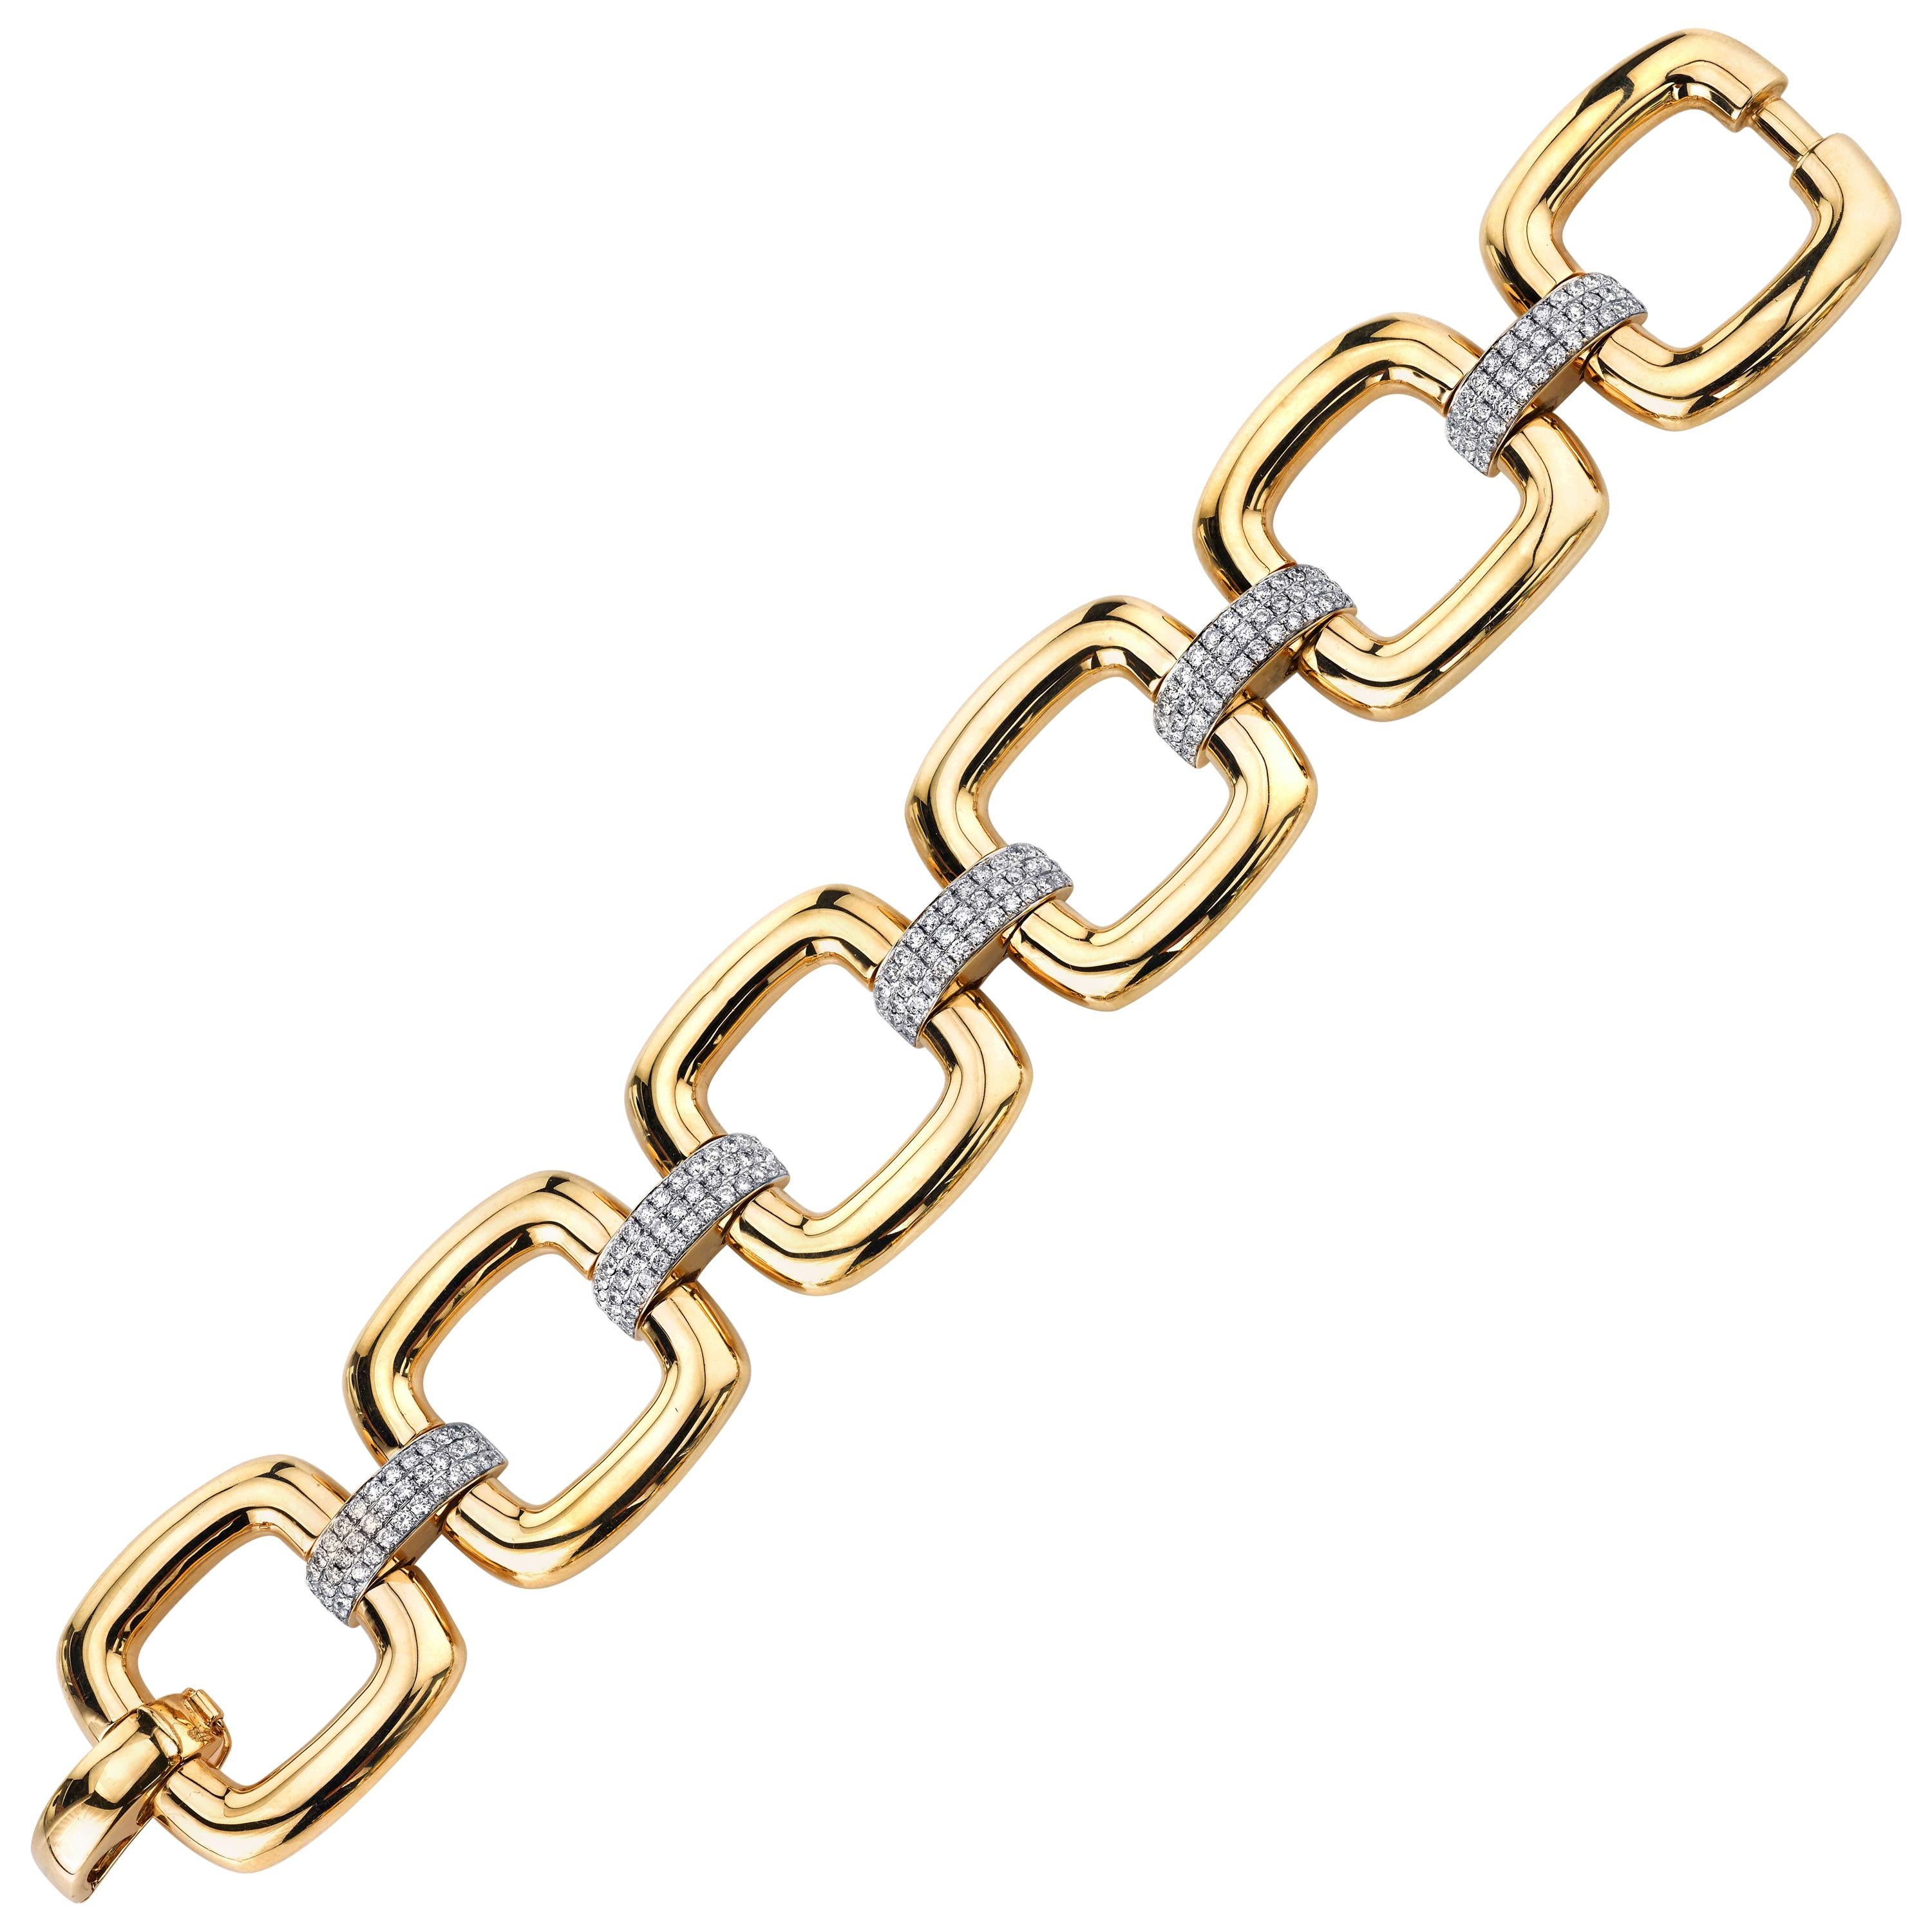 3.07 Carat Total, Diamond and Yellow Gold Link Bracelet For Sale